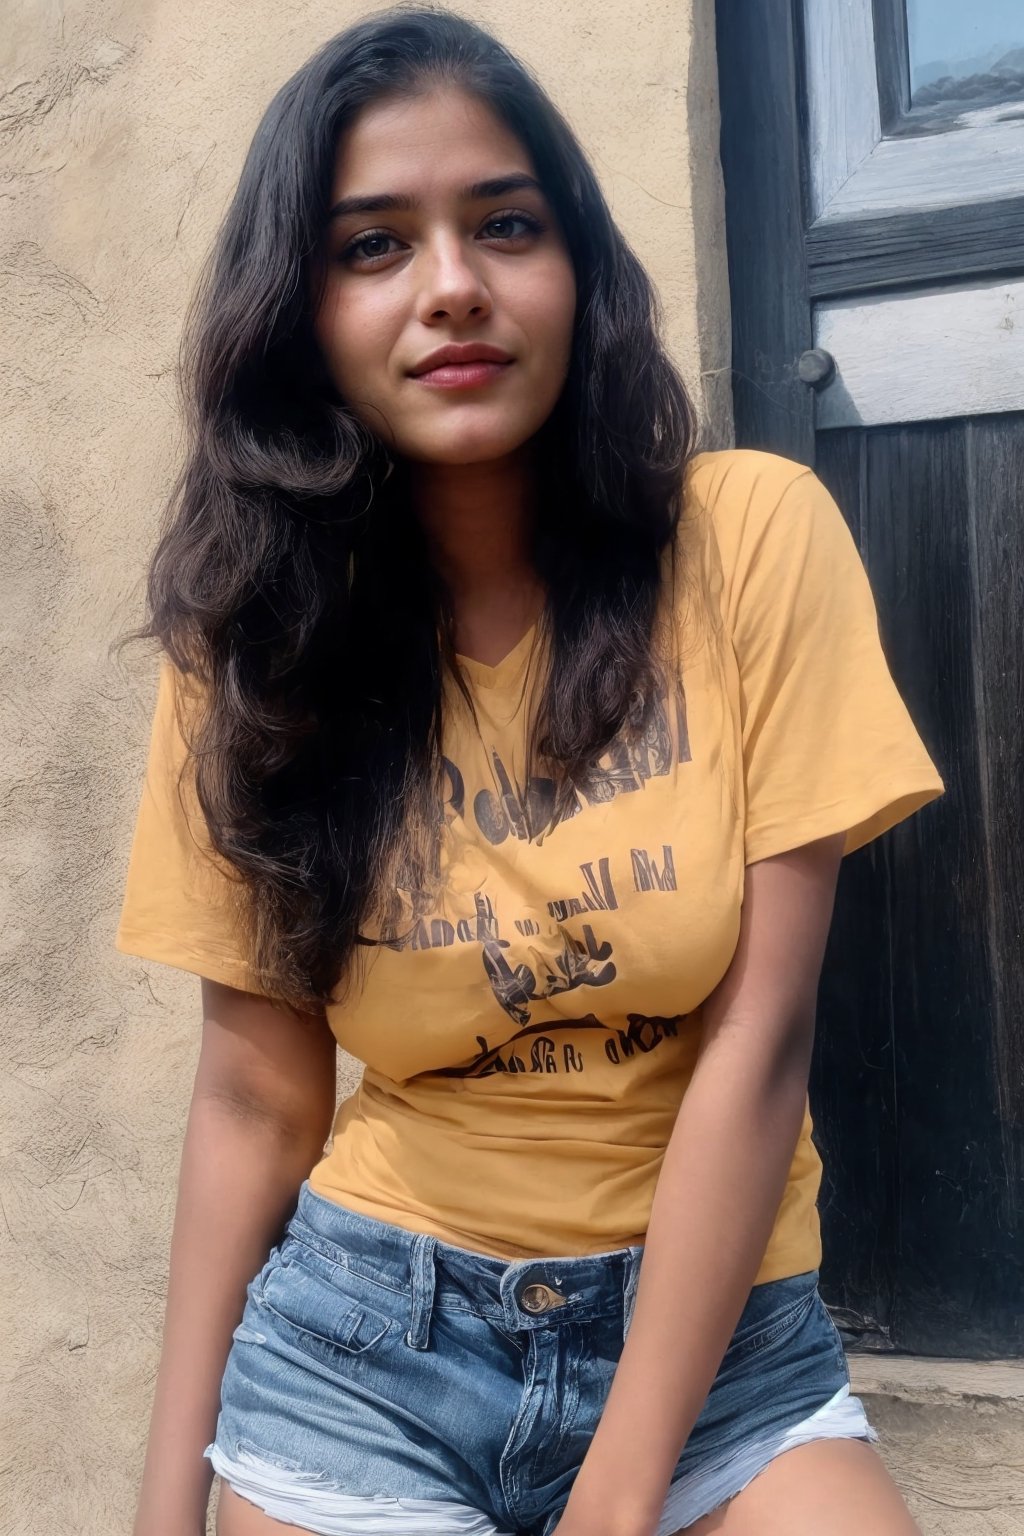 beautiful cute young attractive girl indian, teenage girl, village girl,18 year old,cute, instagram model,long black hair .color hair, brown skin:1, wear seethrough black tshirt and jean shorts, hot look,indian hot ,hot look , smooth face, big_tits, nippels,Brown skin 